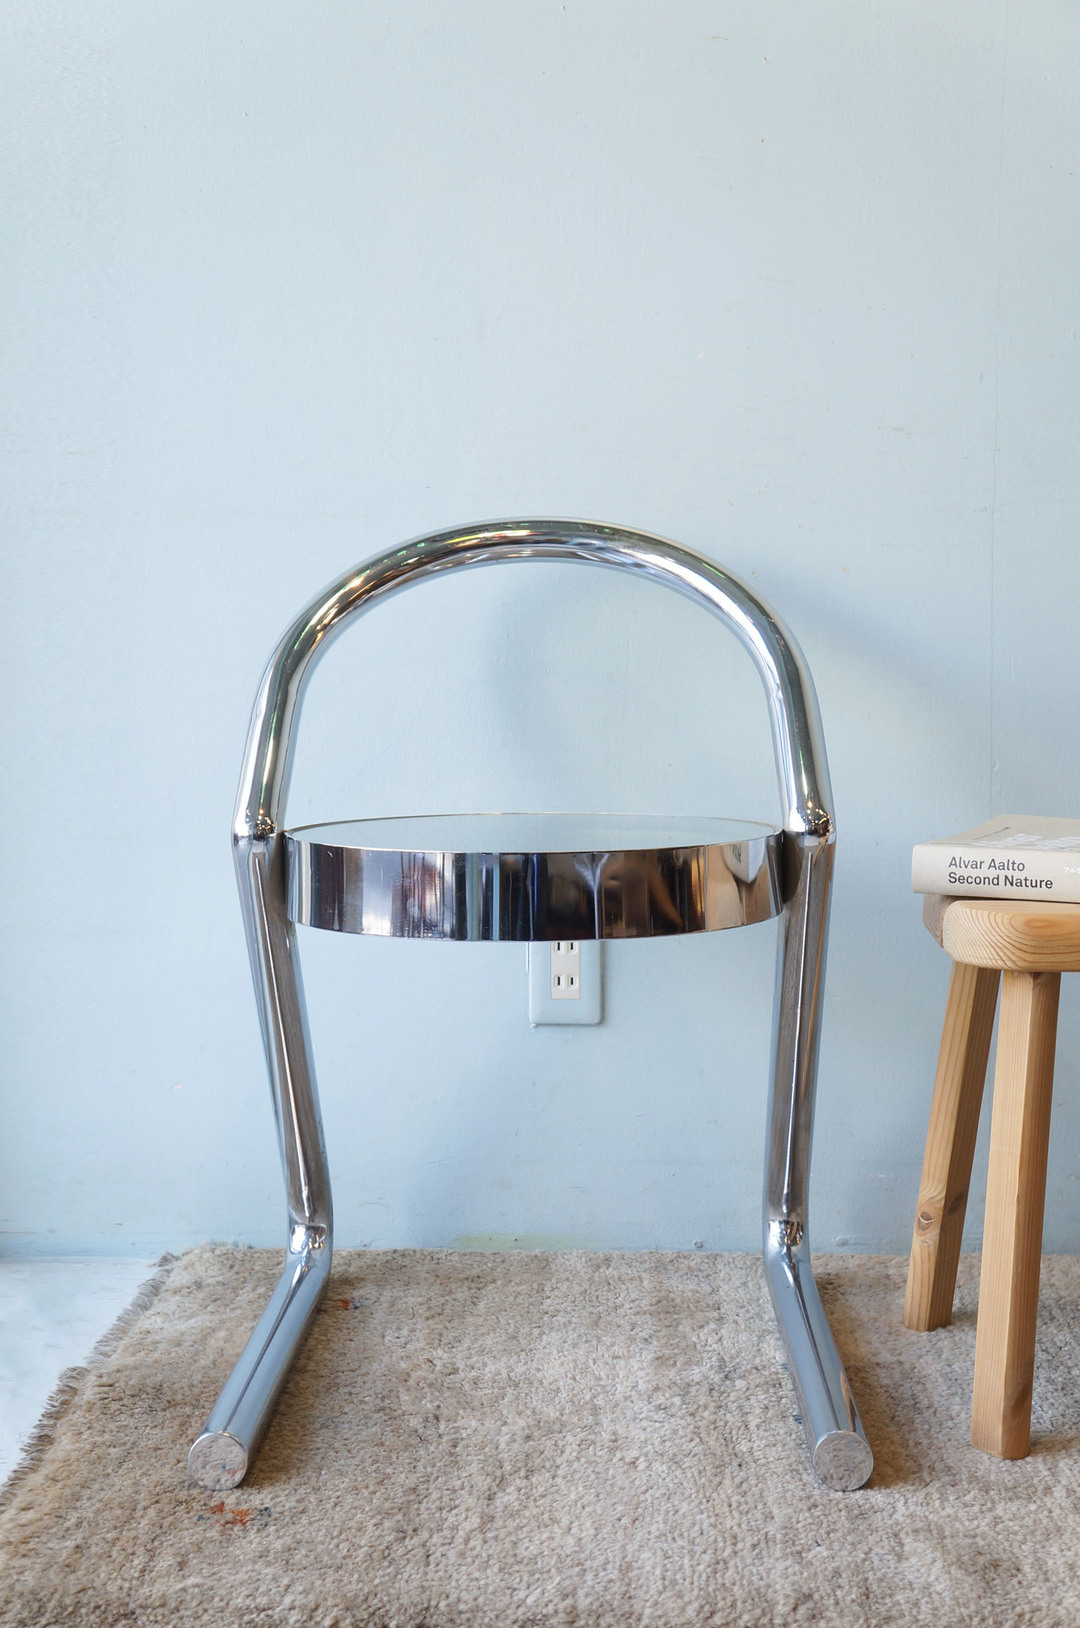 Post Modern Style Glass Chrome Chair/ガラストップチェア 椅子 ポストモダン イタリアンモダン ミッドセンチュリーモダン 1